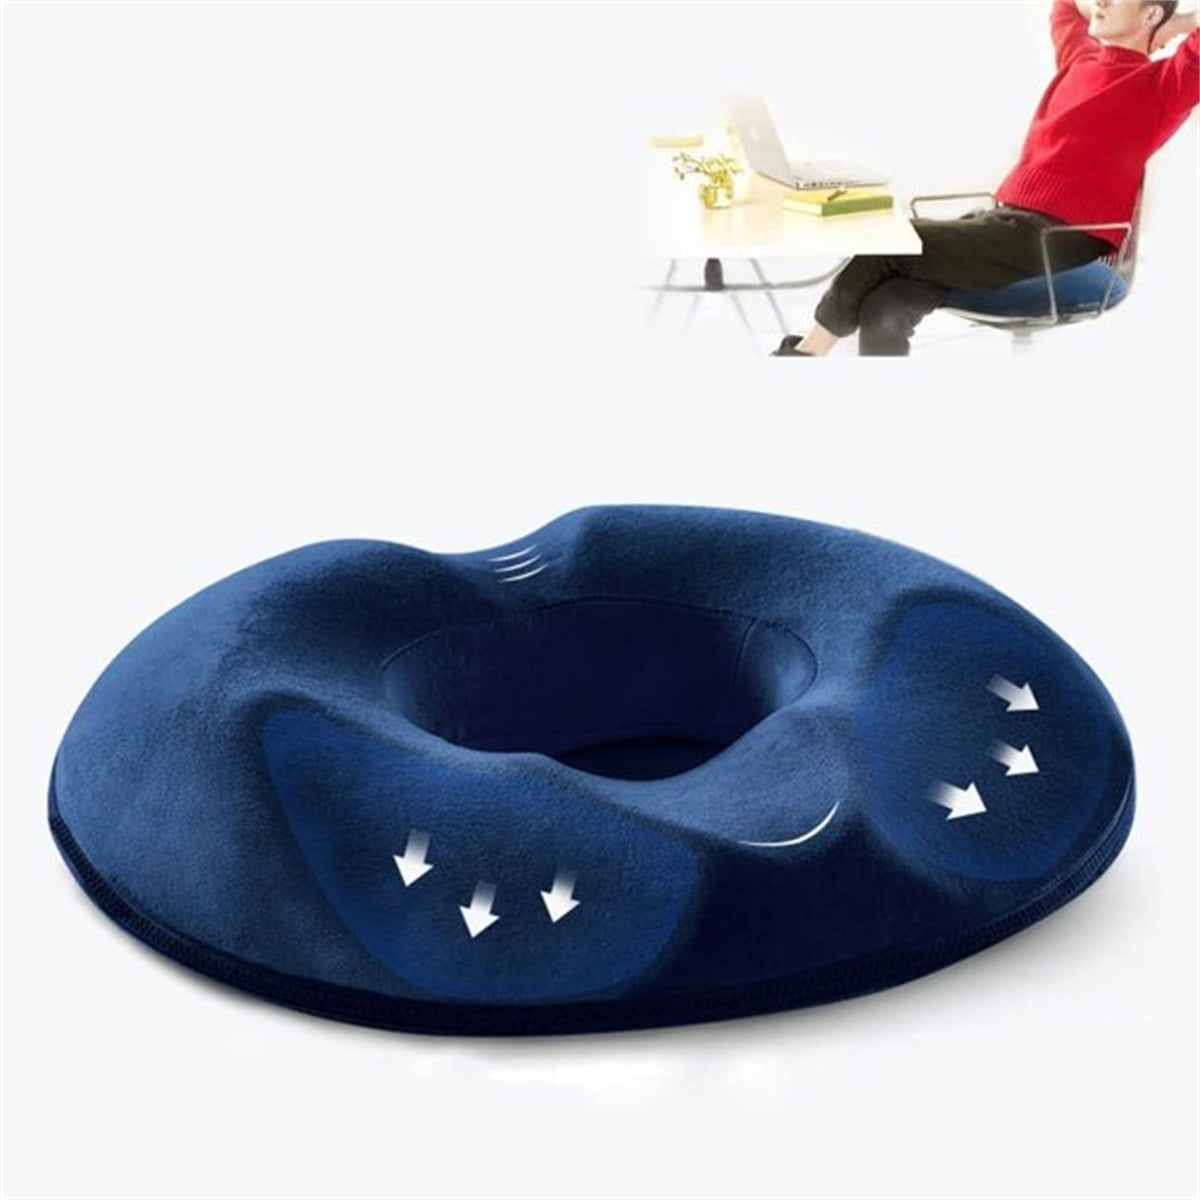 Dropship Pillow For Tailbone Pain Relief Cushion; Hemorrhoid Pillows For  Sitting; Cushion For Postpartum Pregnancy; Butt Seat Cushion; Back; Coccyx;  Sciatica; Post Natal; After Surgery Support Pad to Sell Online at a